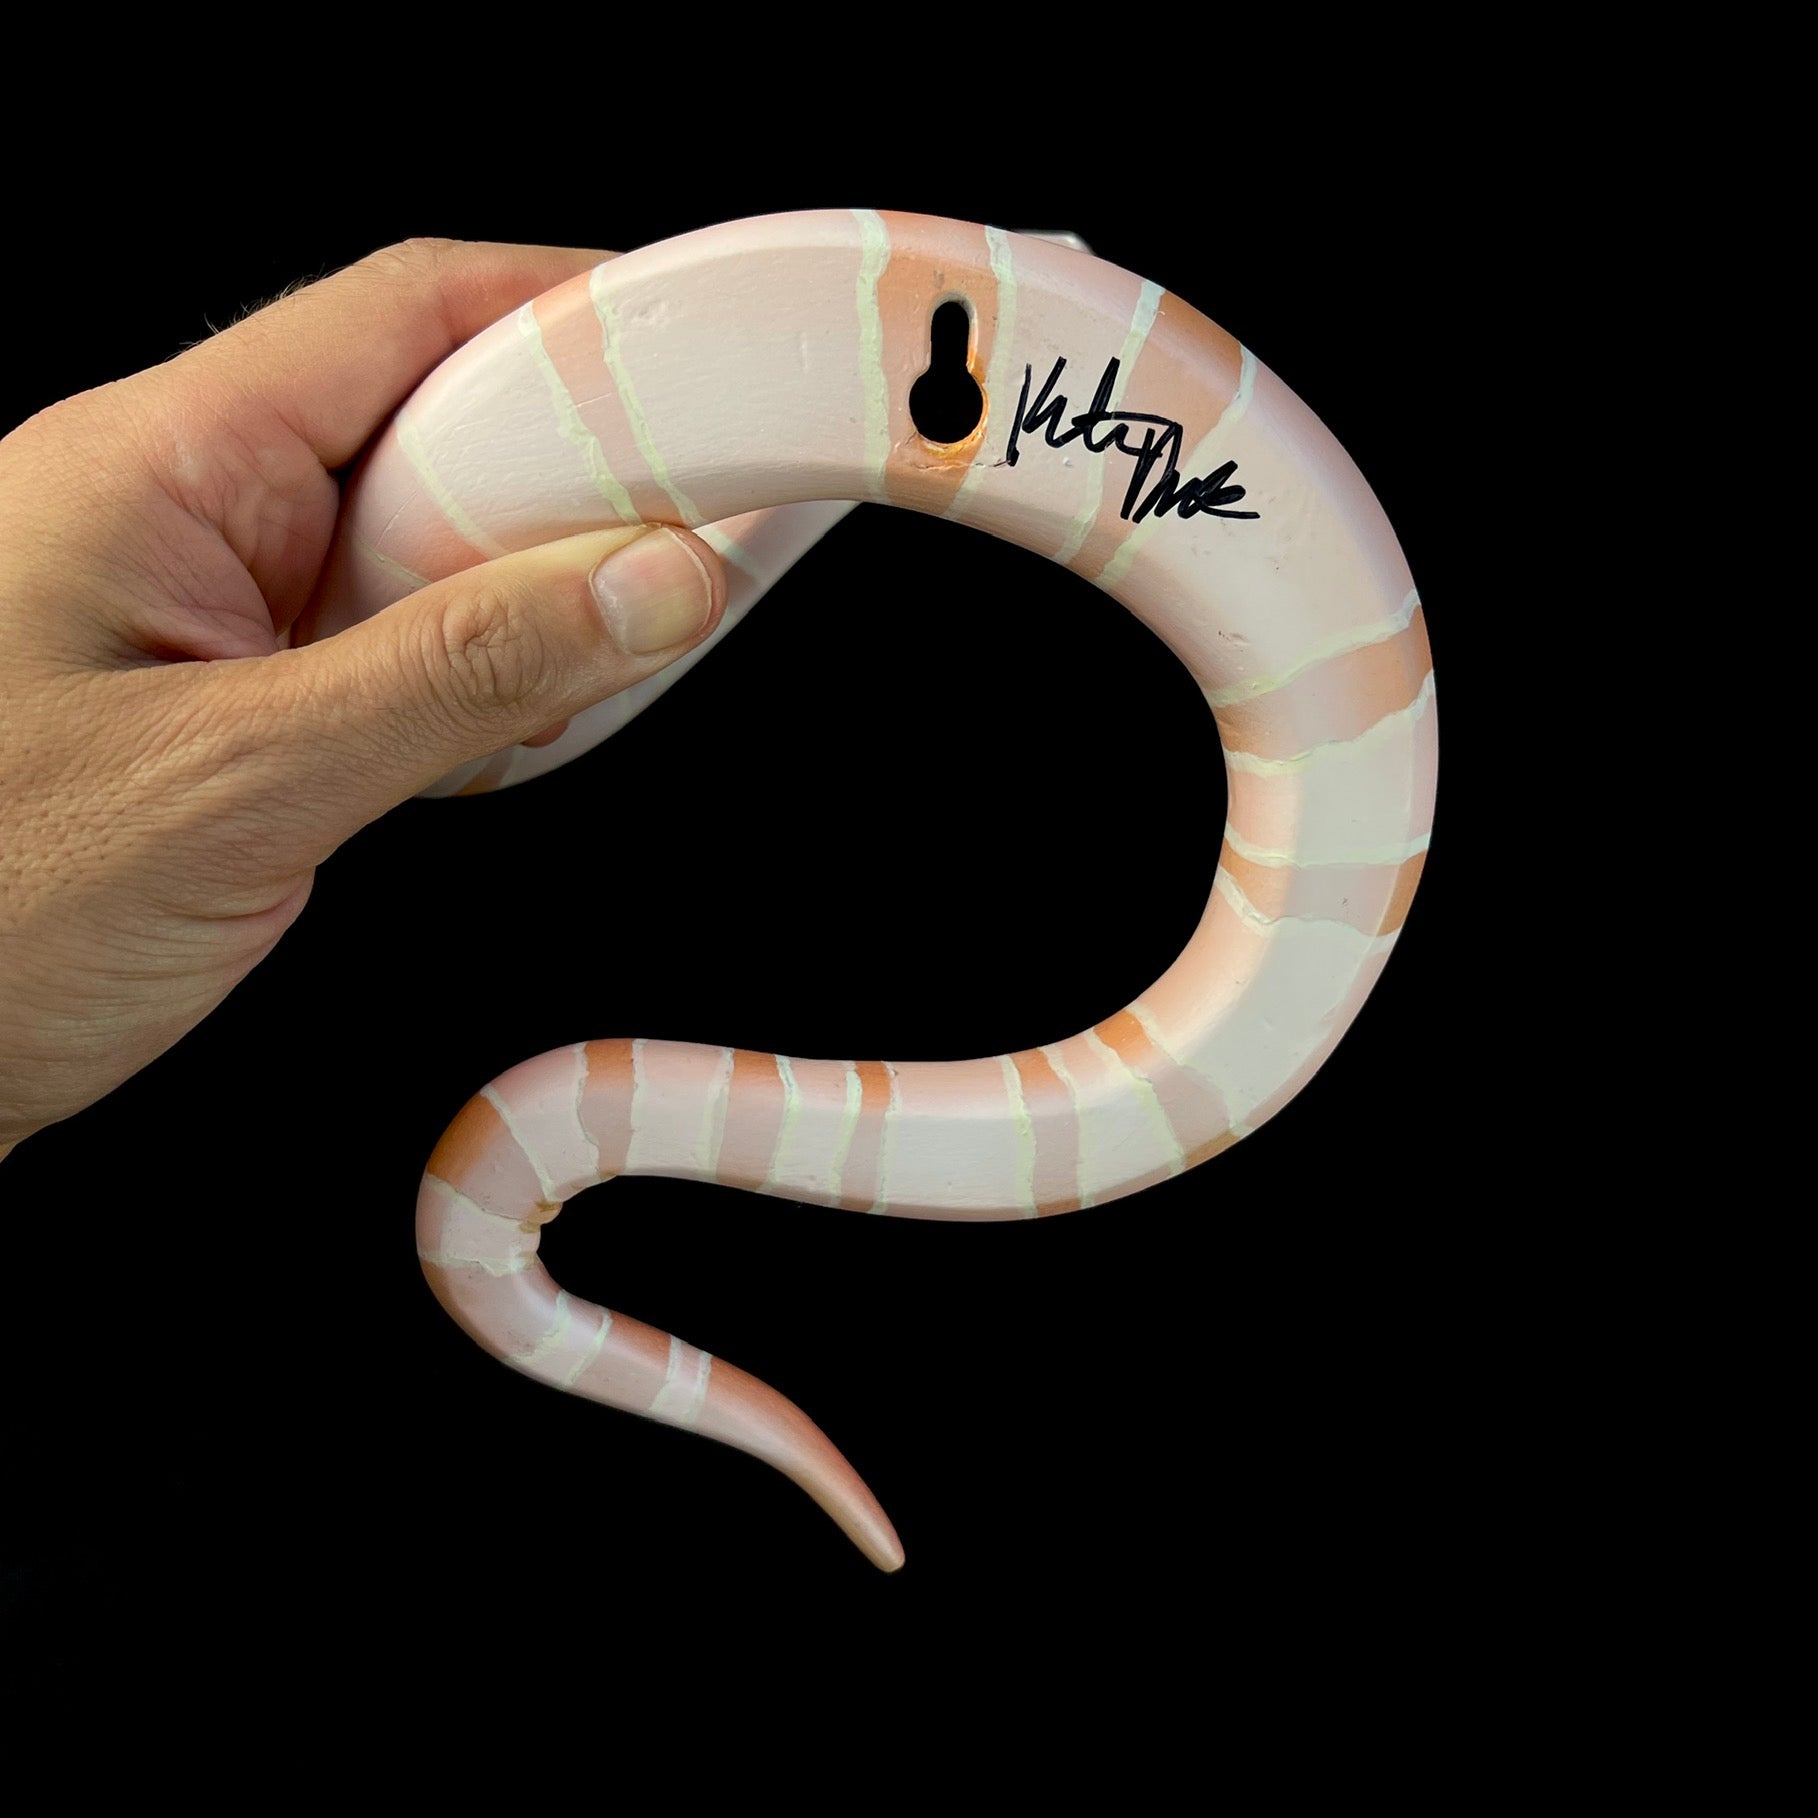 Back view of snake displaying wall hanging apparatus and artists signature